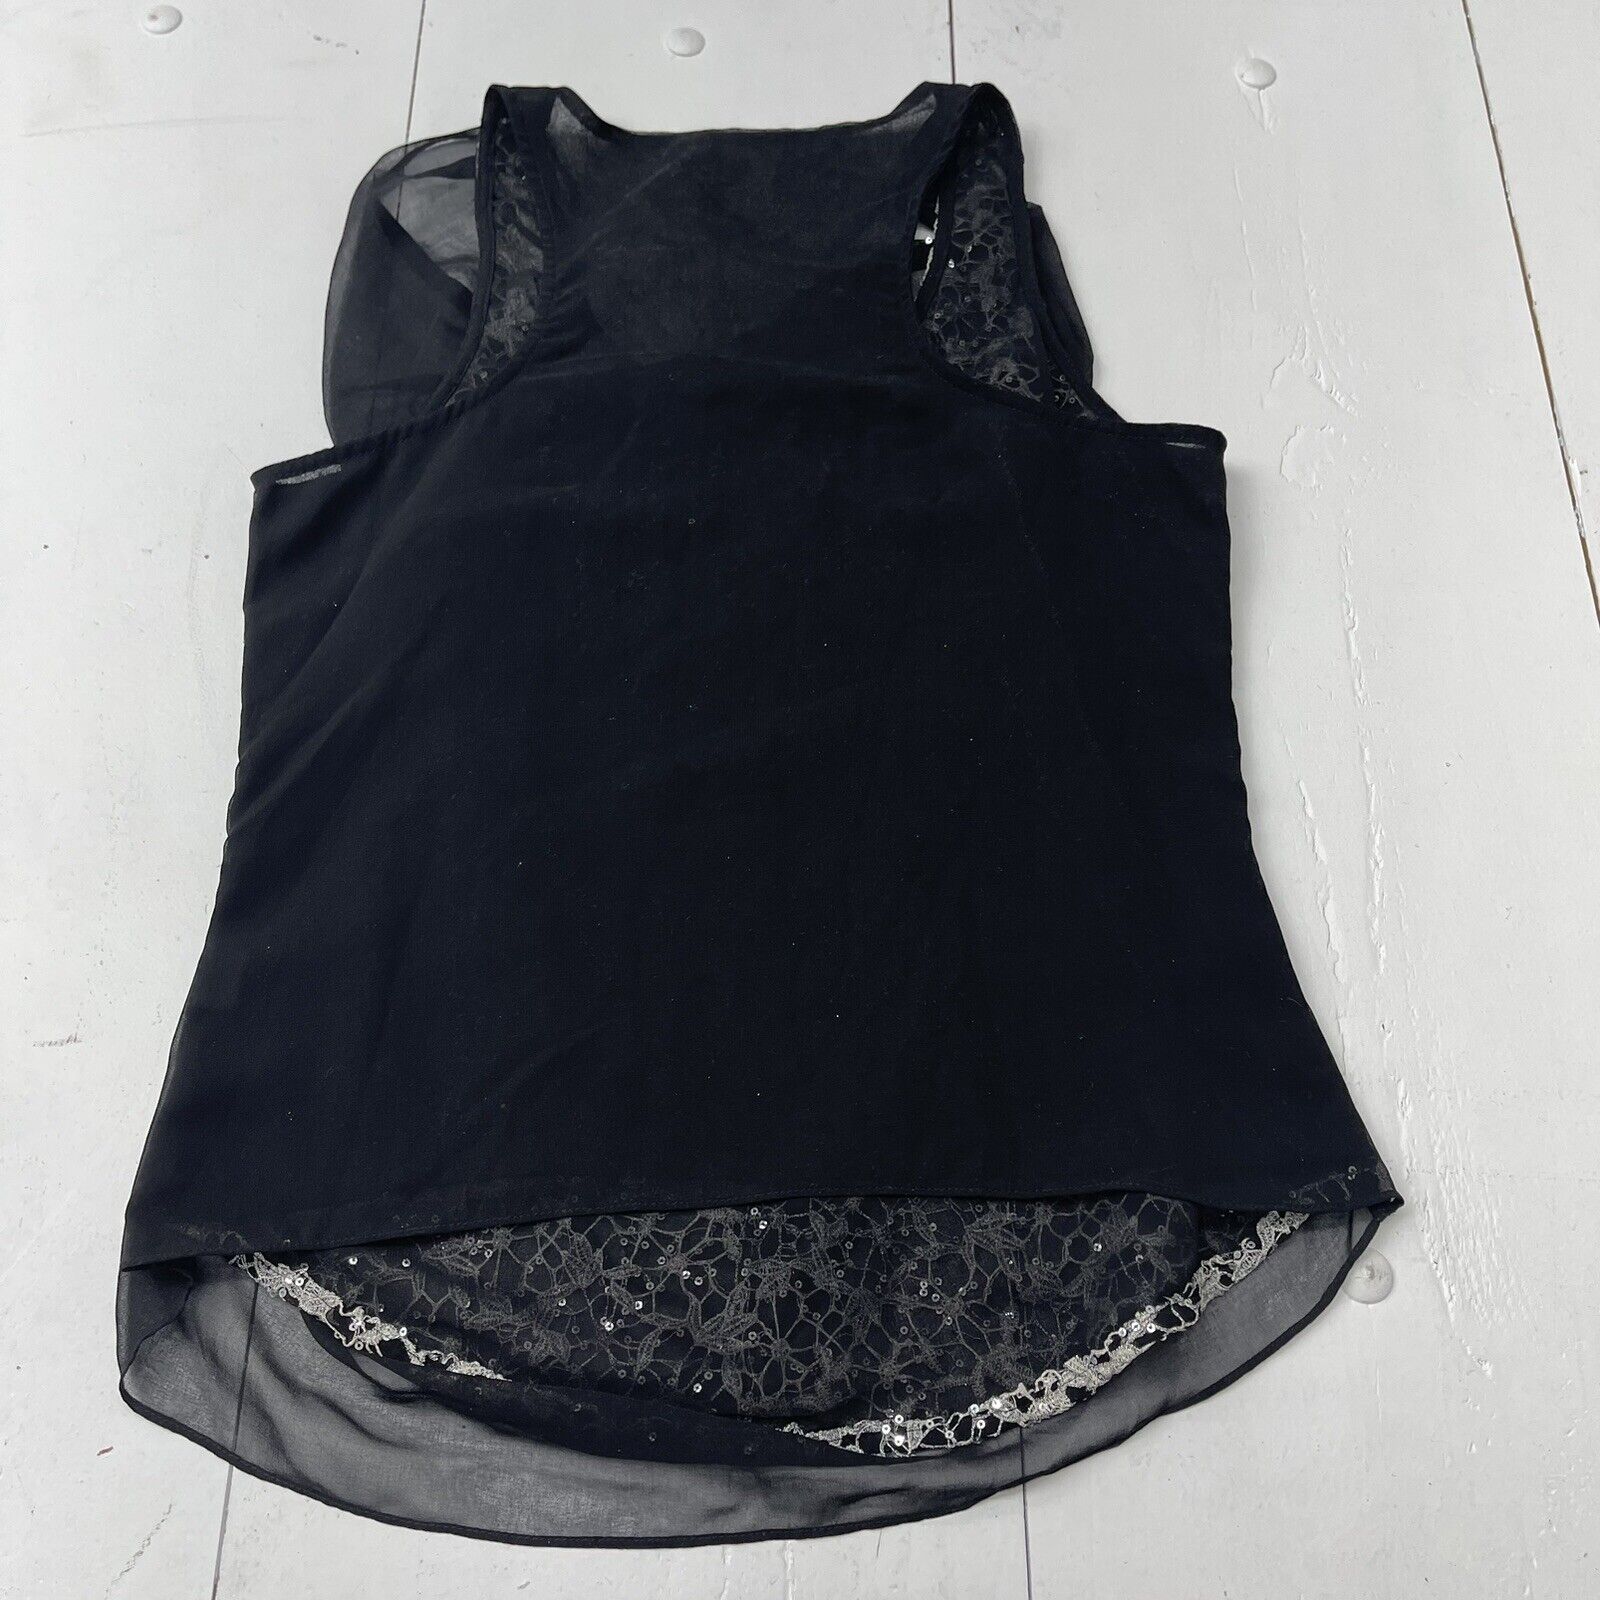 Express Black Lace Crop Tank Top Women’s Size Large New